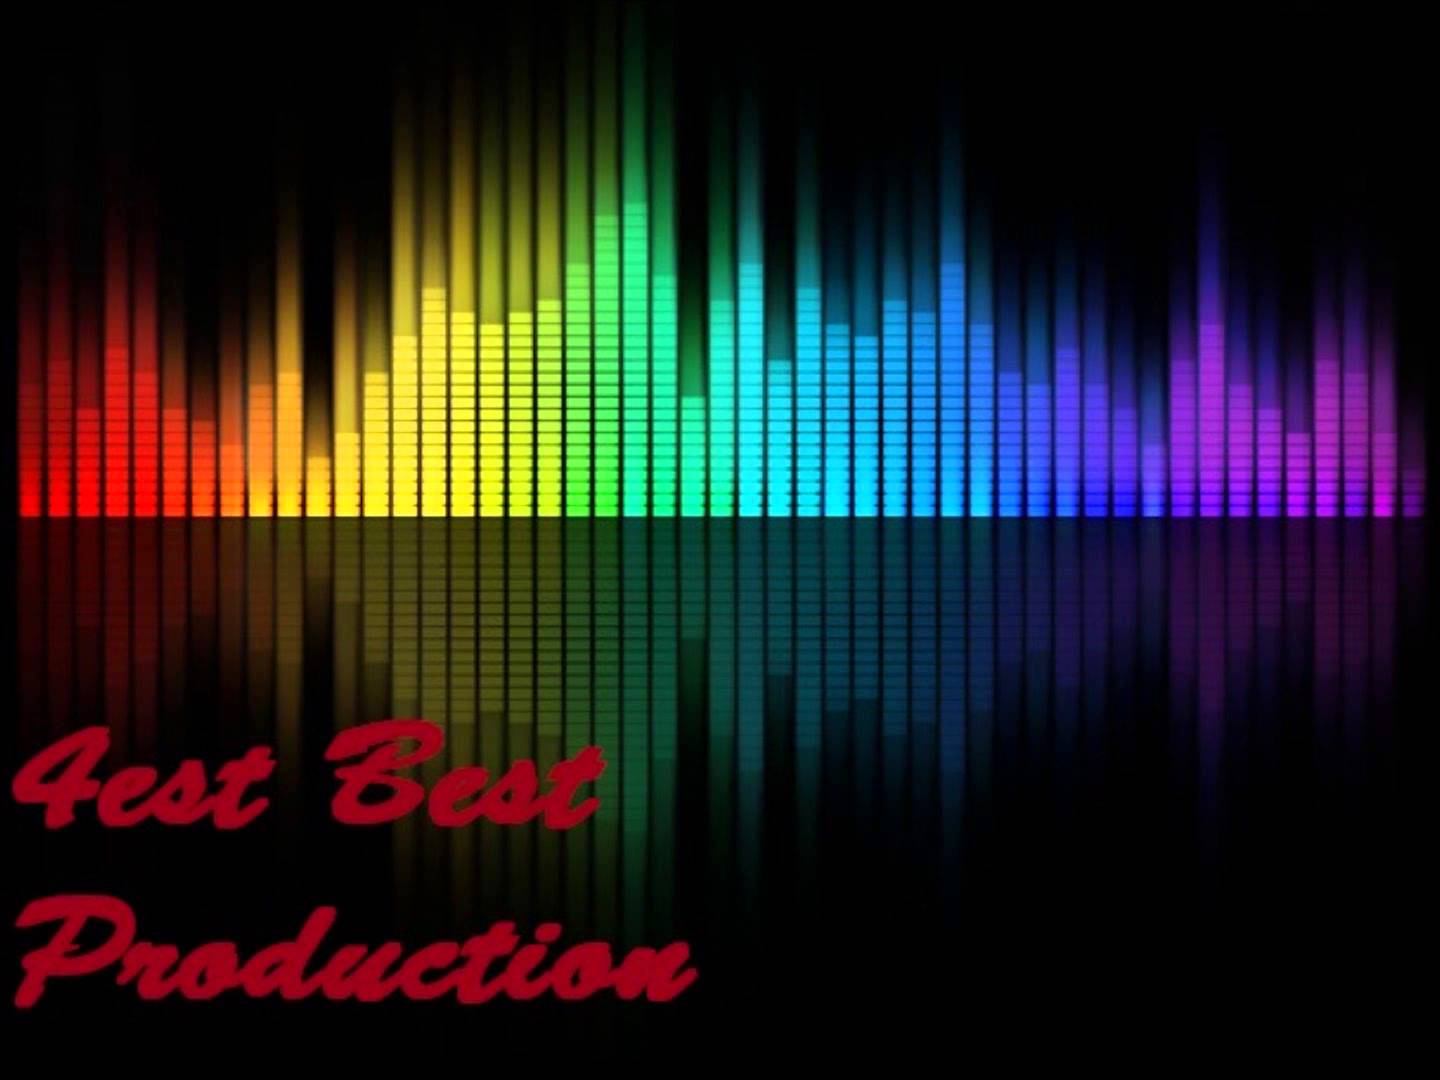 Digital Music Beats Background Shows Music Soundtrack Or Sound Pulse Stock  Image Colourbox 